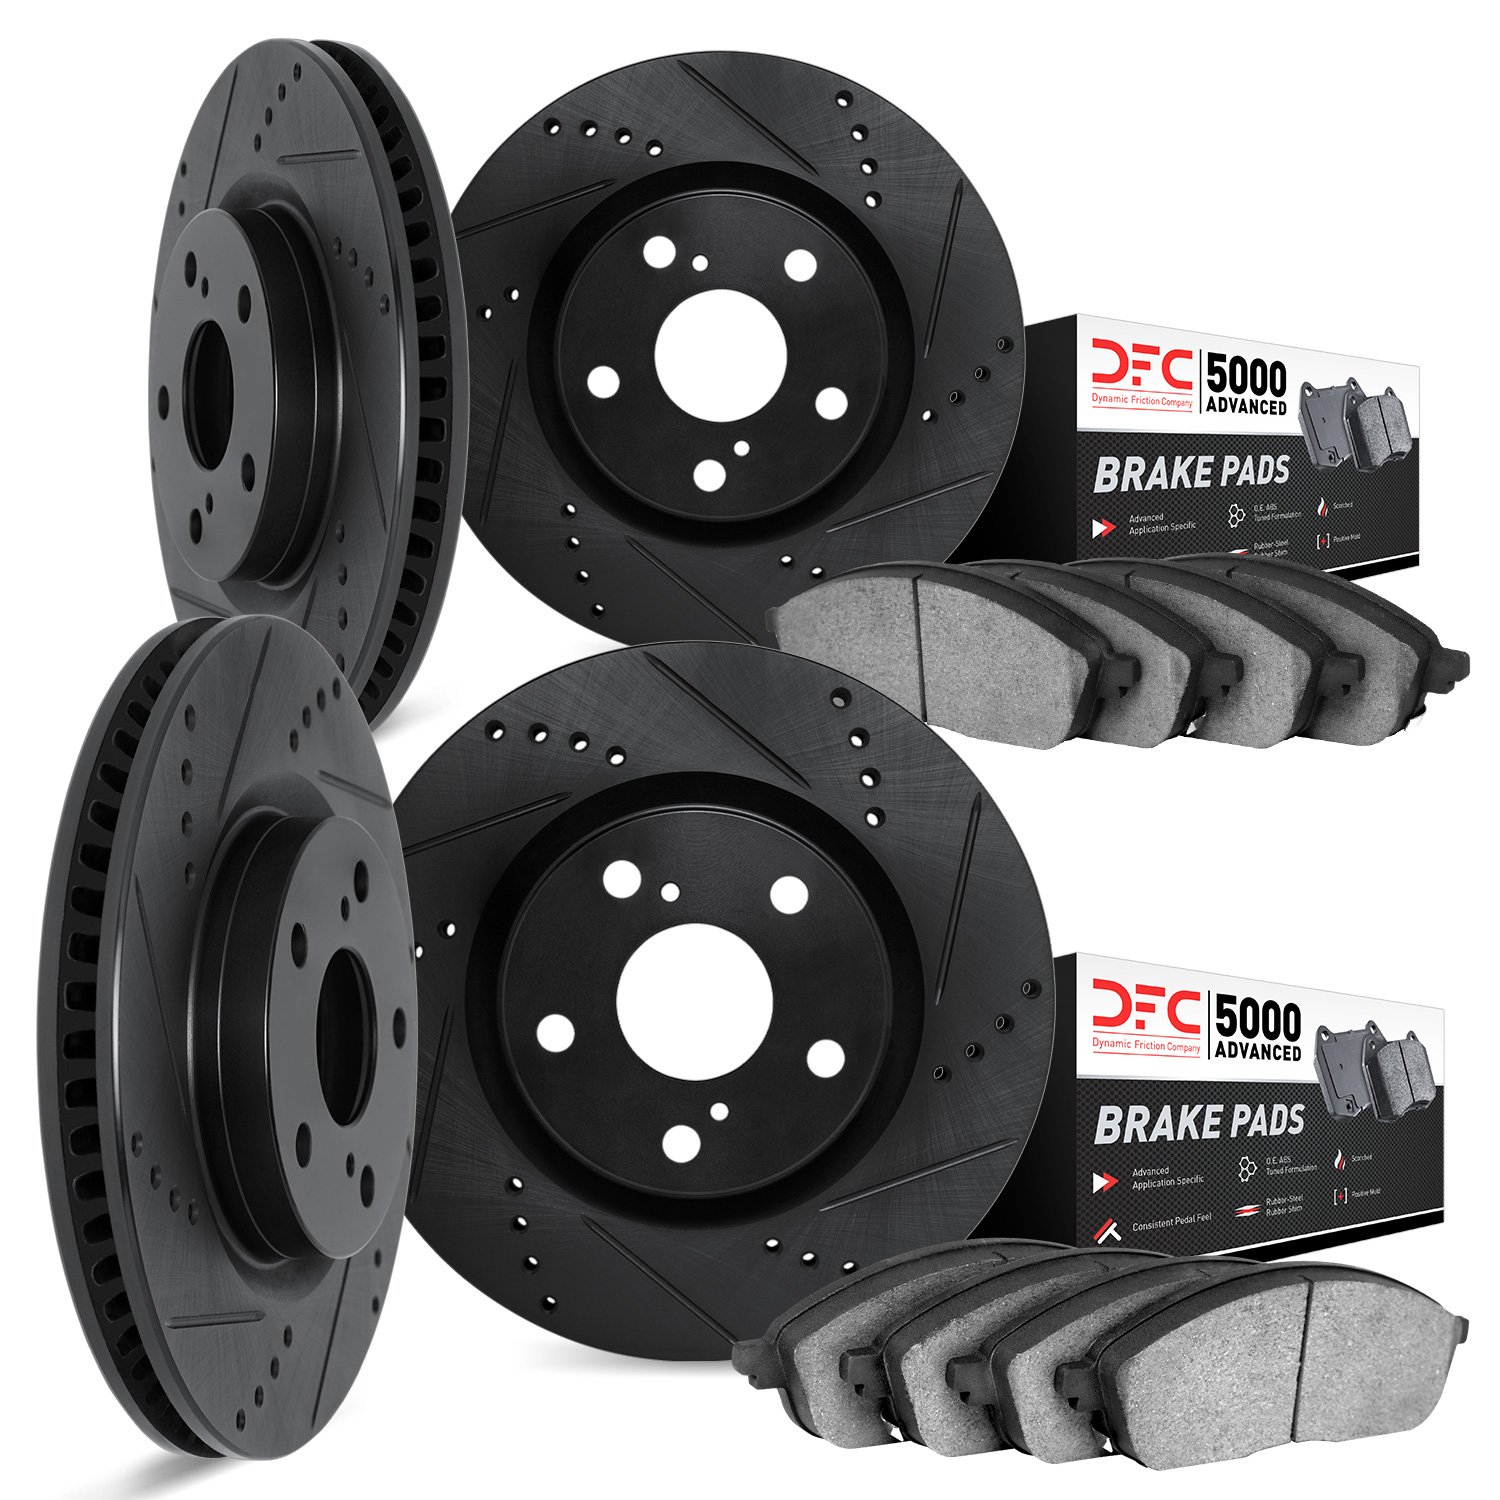 8504-46035 Drilled/Slotted Brake Rotors w/5000 Advanced Brake Pads Kit [Black], 2005-2010 GM, Position: Front and Rear